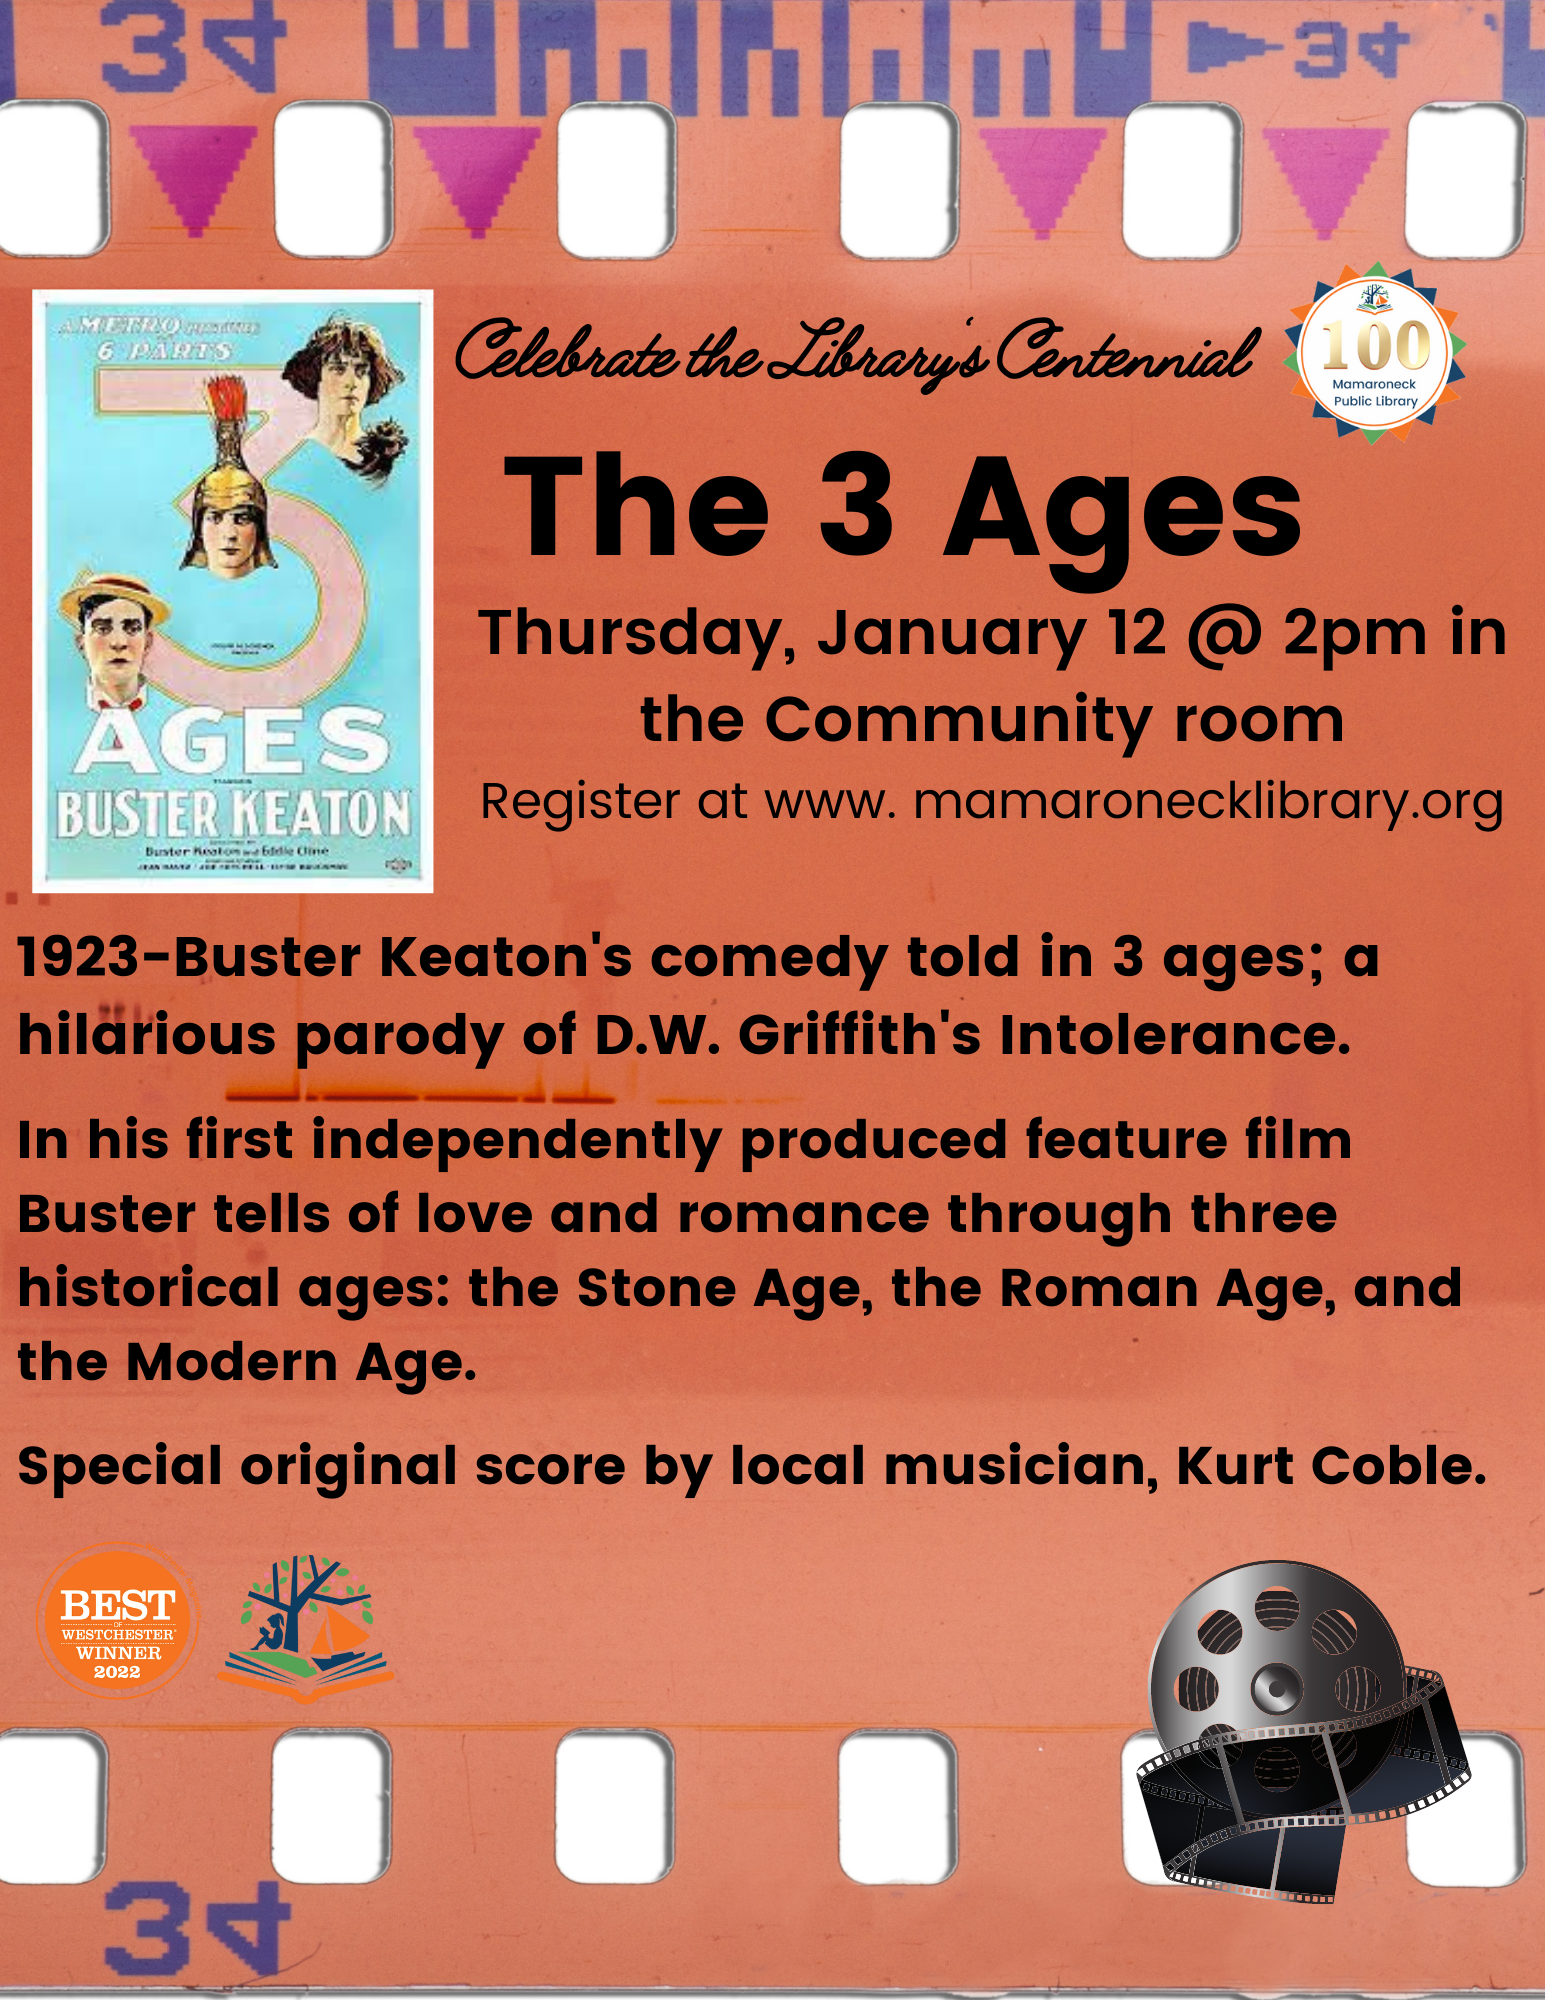 1/12/23 - The Three Ages by Buster Keaton to be shown in the Community Room @ 2pm